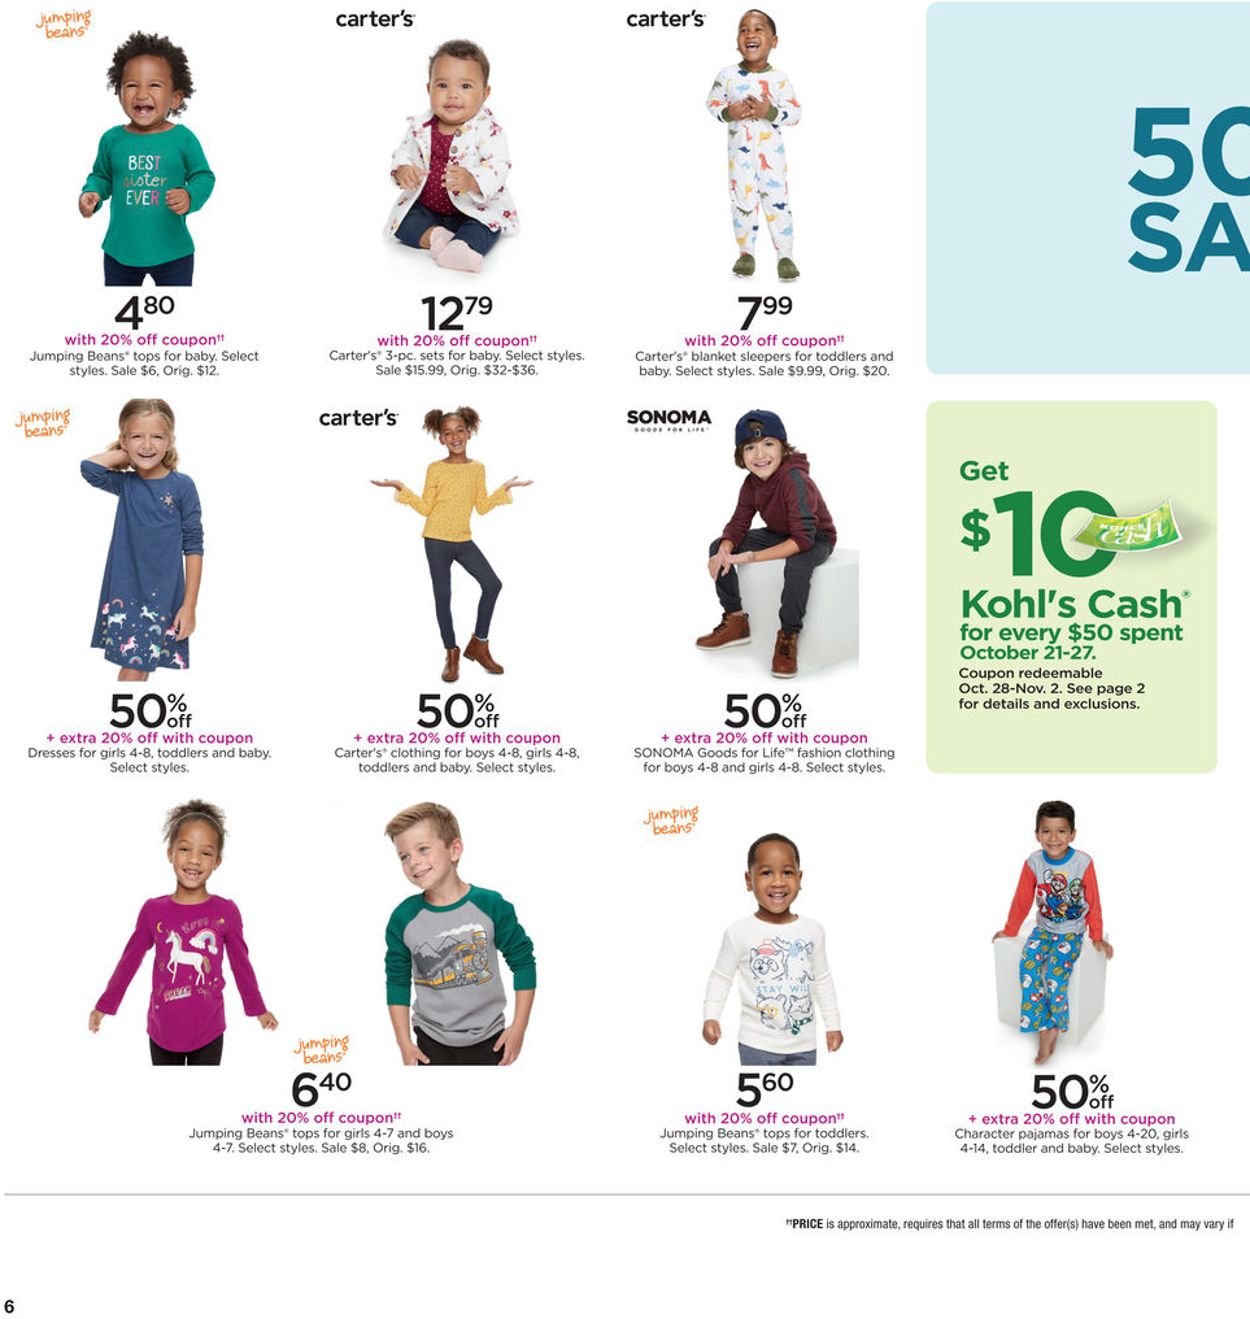 Kohl's Current weekly ad 10/24 - 10/27/2019 [6] - frequent-ads.com